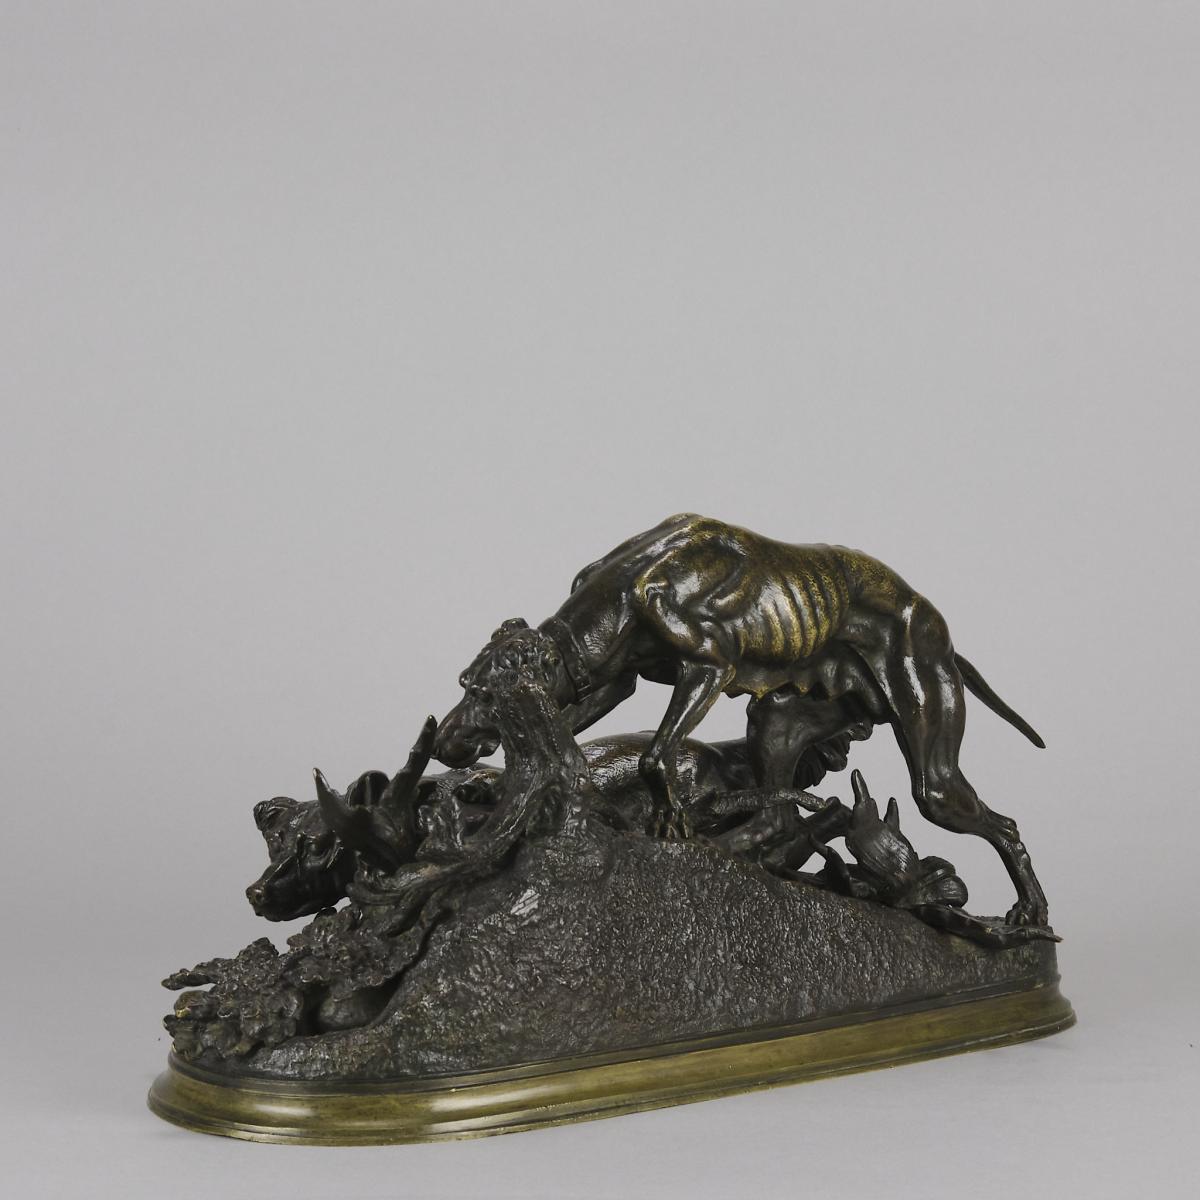 French animalier bronze entitled "Chasse au Lapin" by Jules Moigniez - 1870